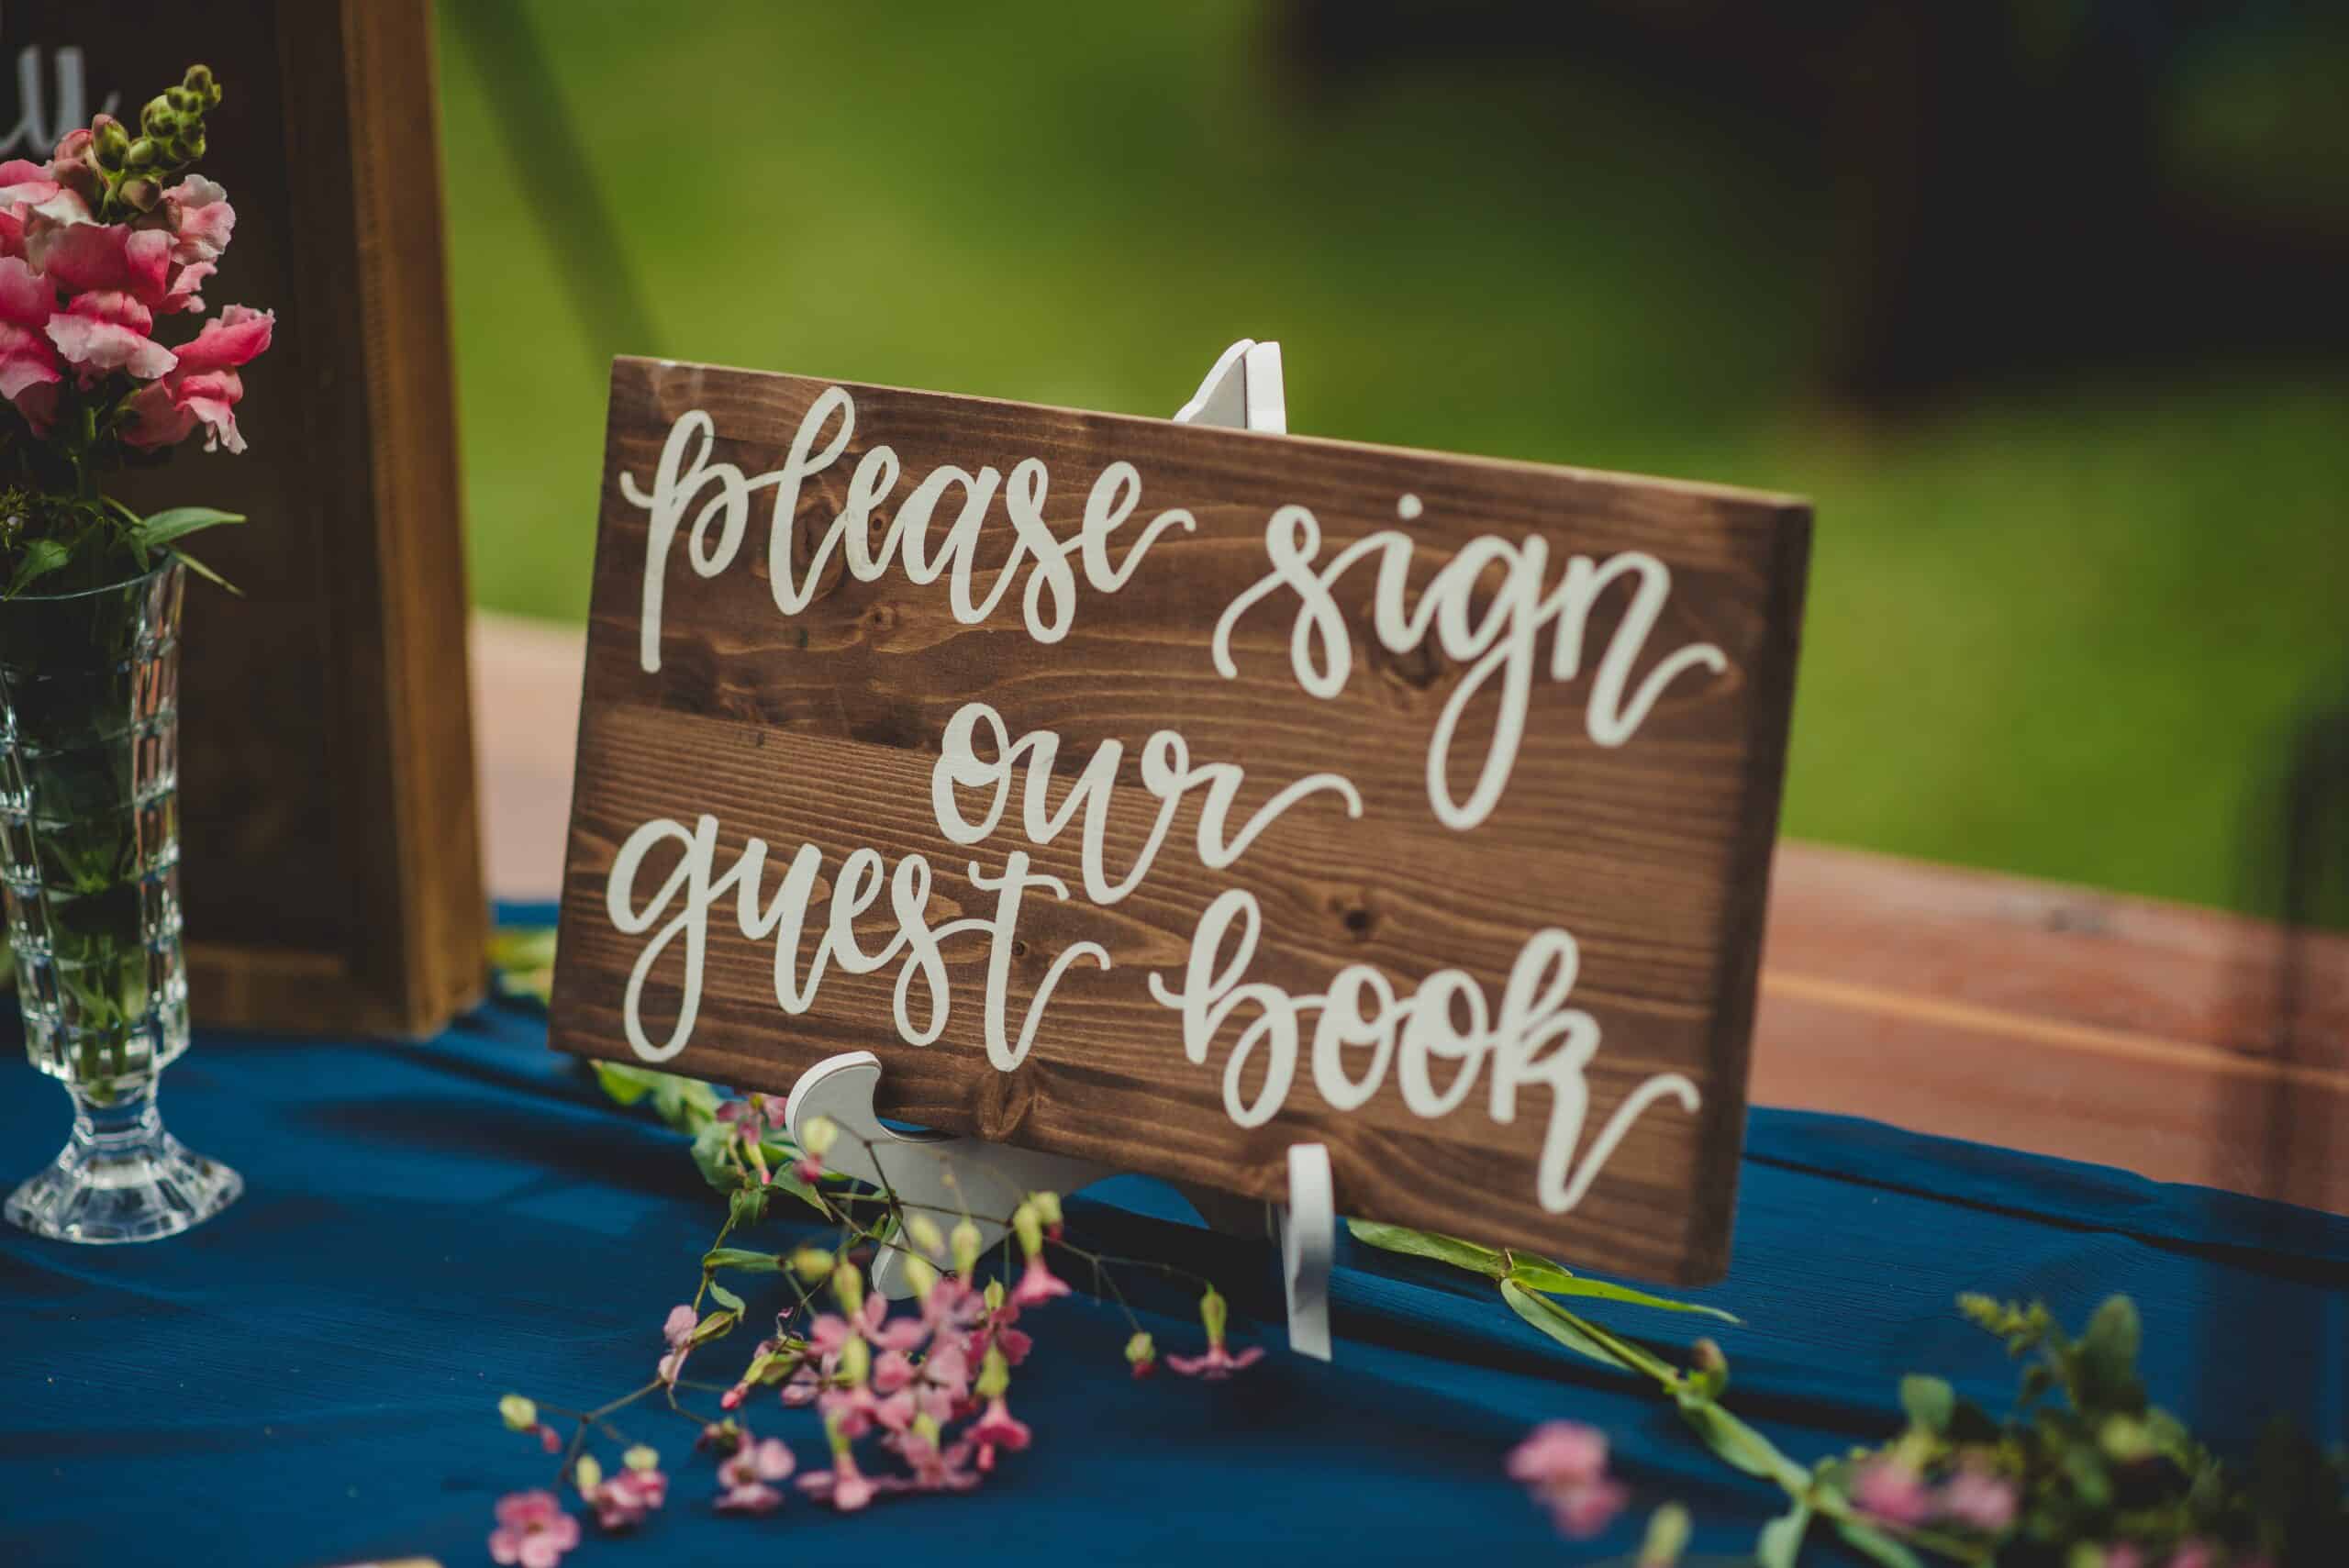 "Please sign our guest book" wooden wedding decor sign